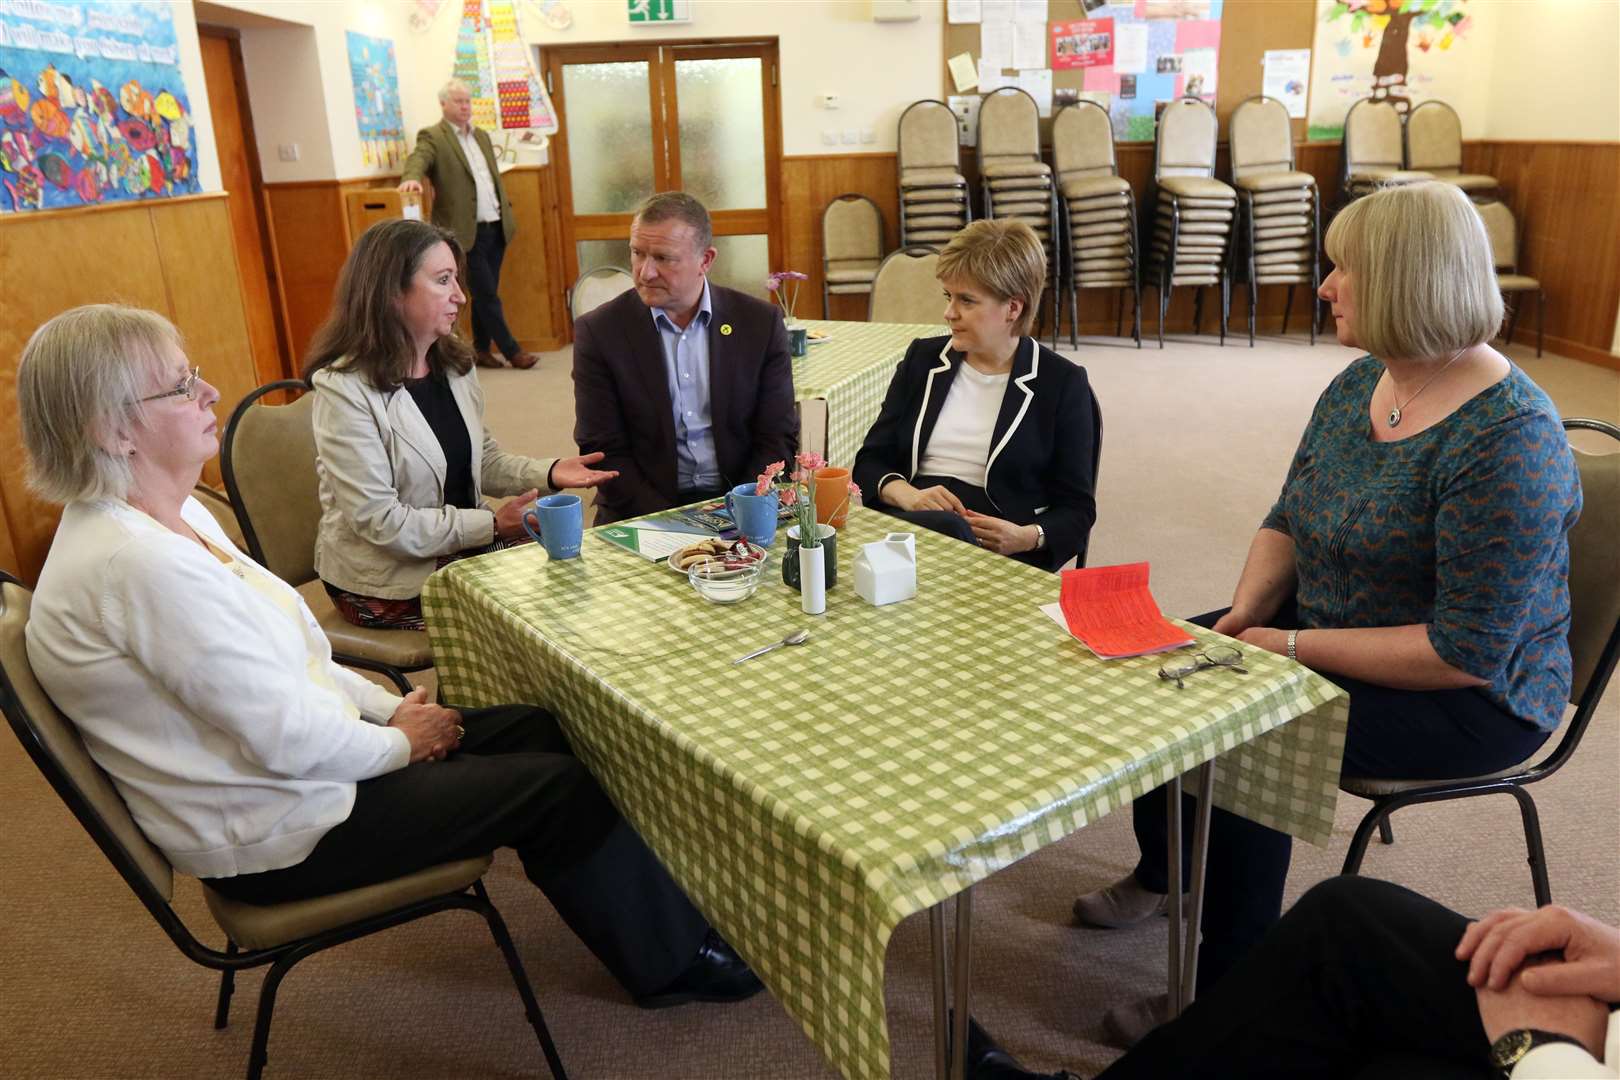 Chatting with volunteers at a foodbank in Merkinch. Pictured with the First Minister are Marilyn MacIver, Anne Sutherland, and Lorna Dempster (foodbank coordinator) and Drew Hendry MP. Picture: John Baikie 037660.